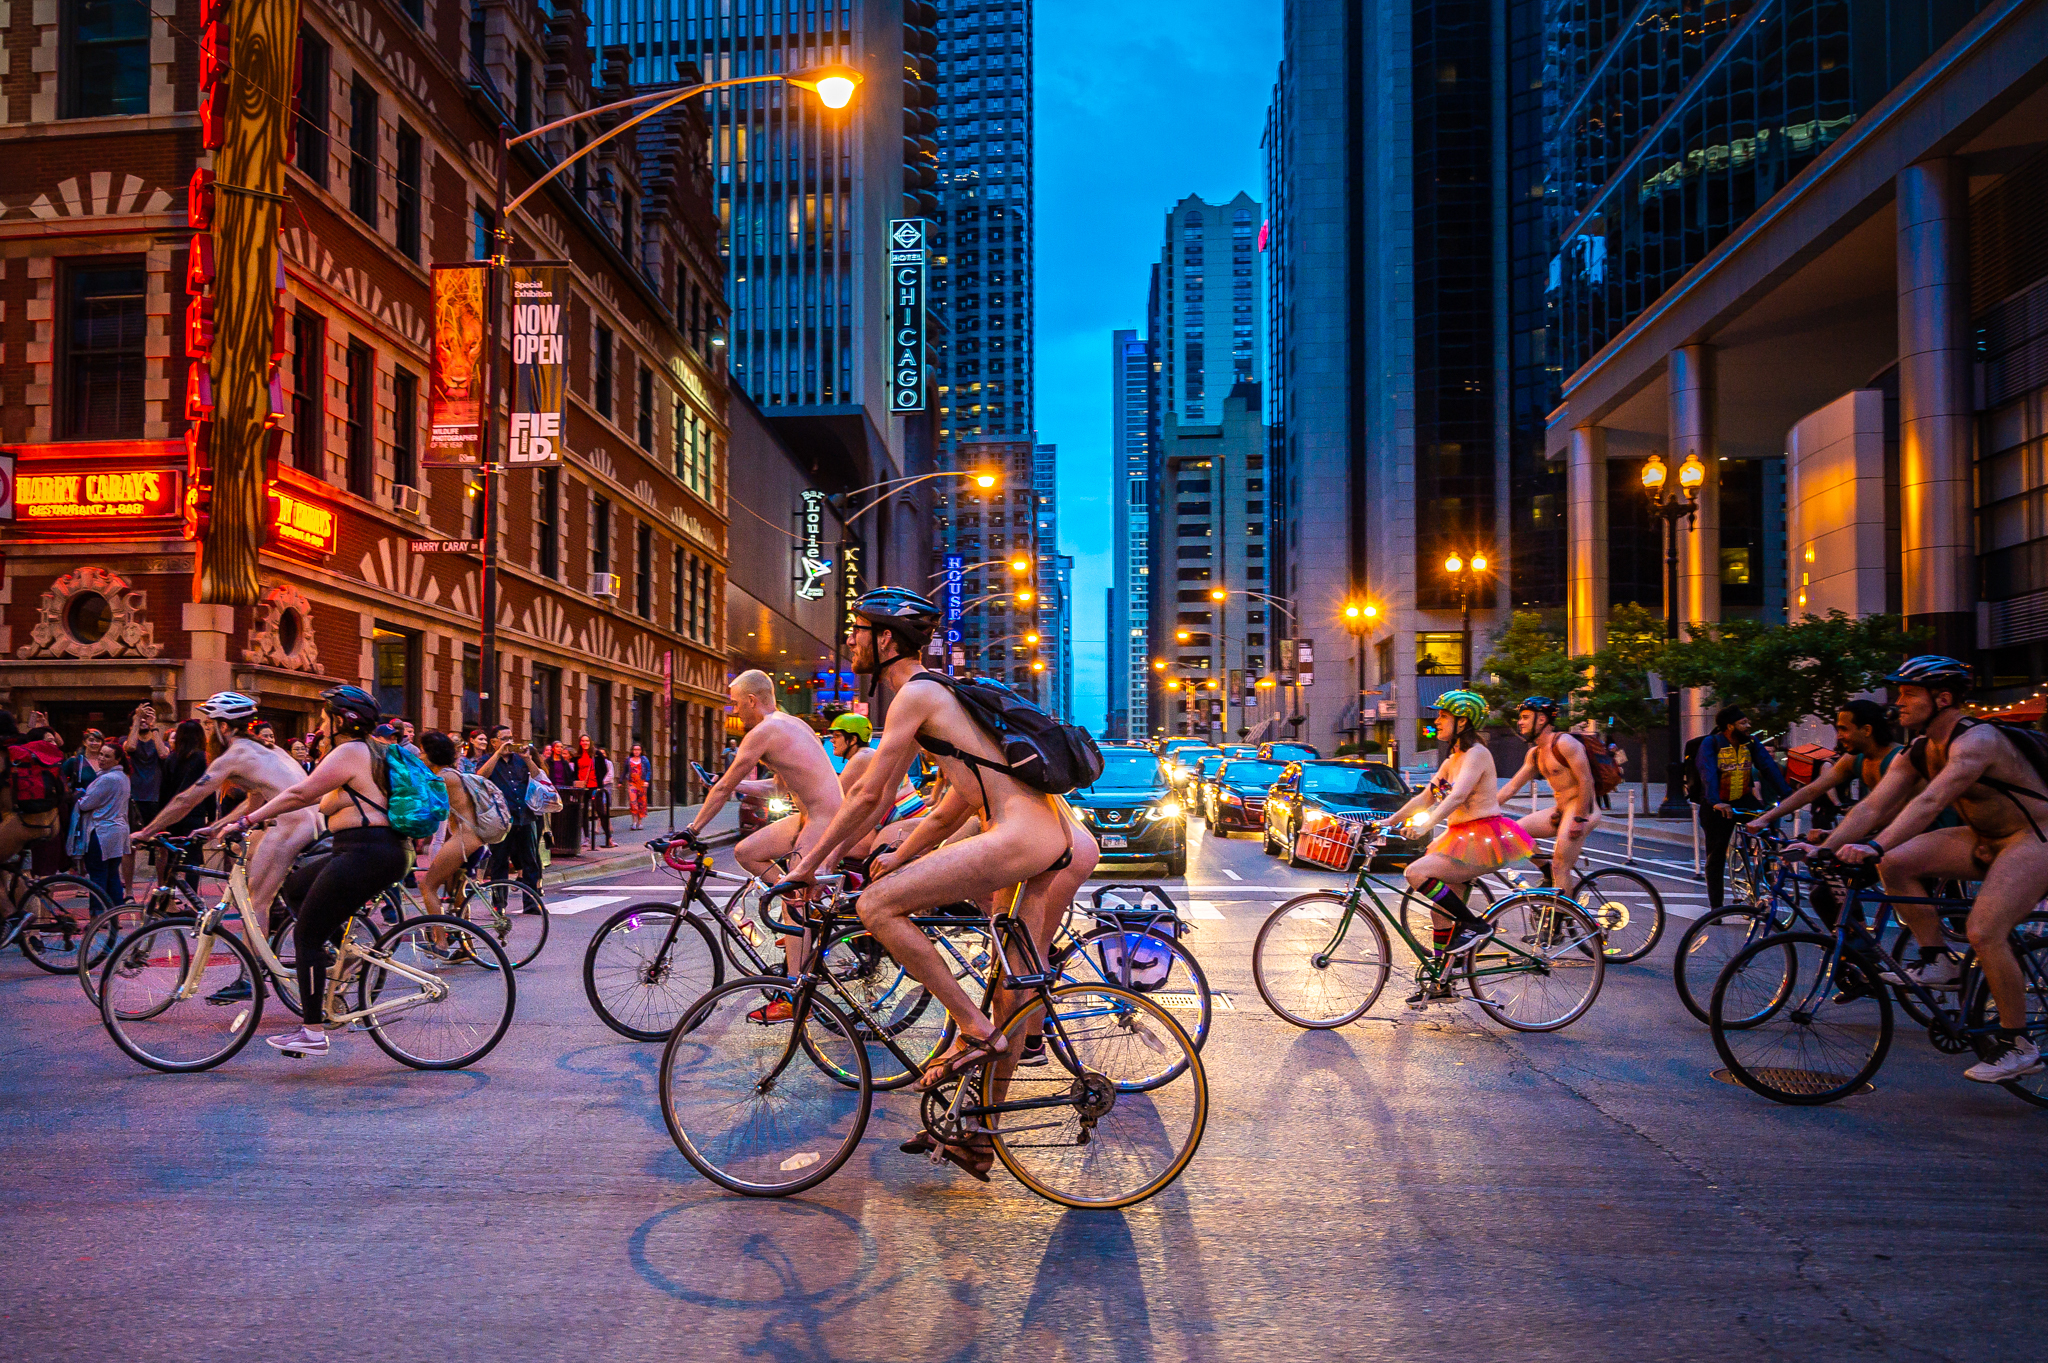 Take a look at photos from World Naked Bike Ride Chicago 2019.